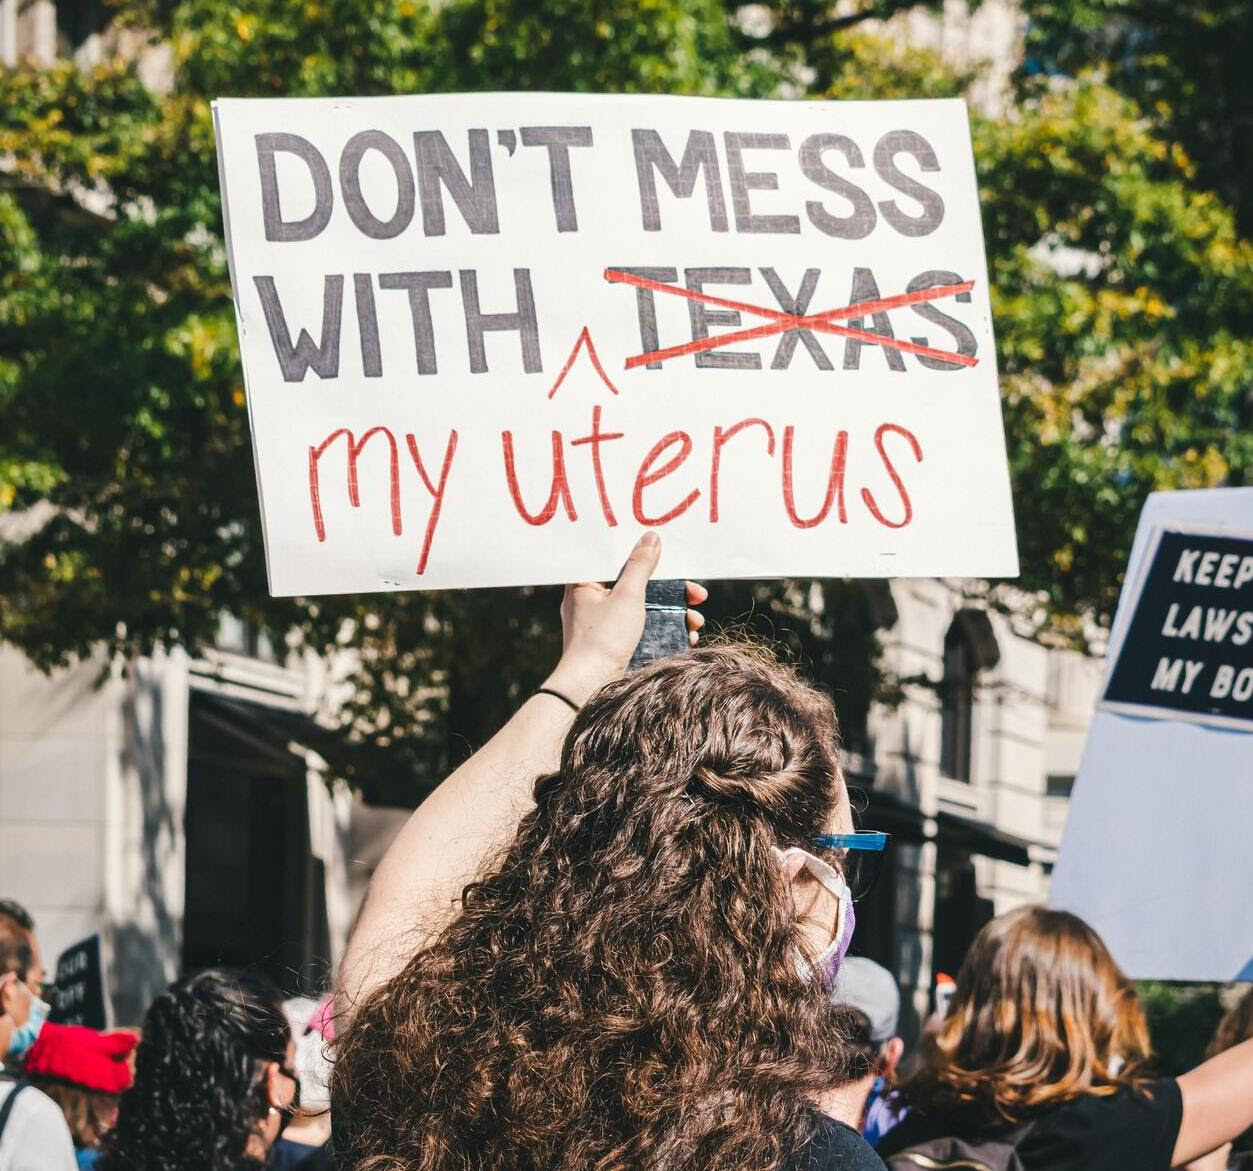 Texas’s cruel anti-abortion law will force women to carry these babies with no hope of survival for nine months, only to have to watch them suffer and die after birth.